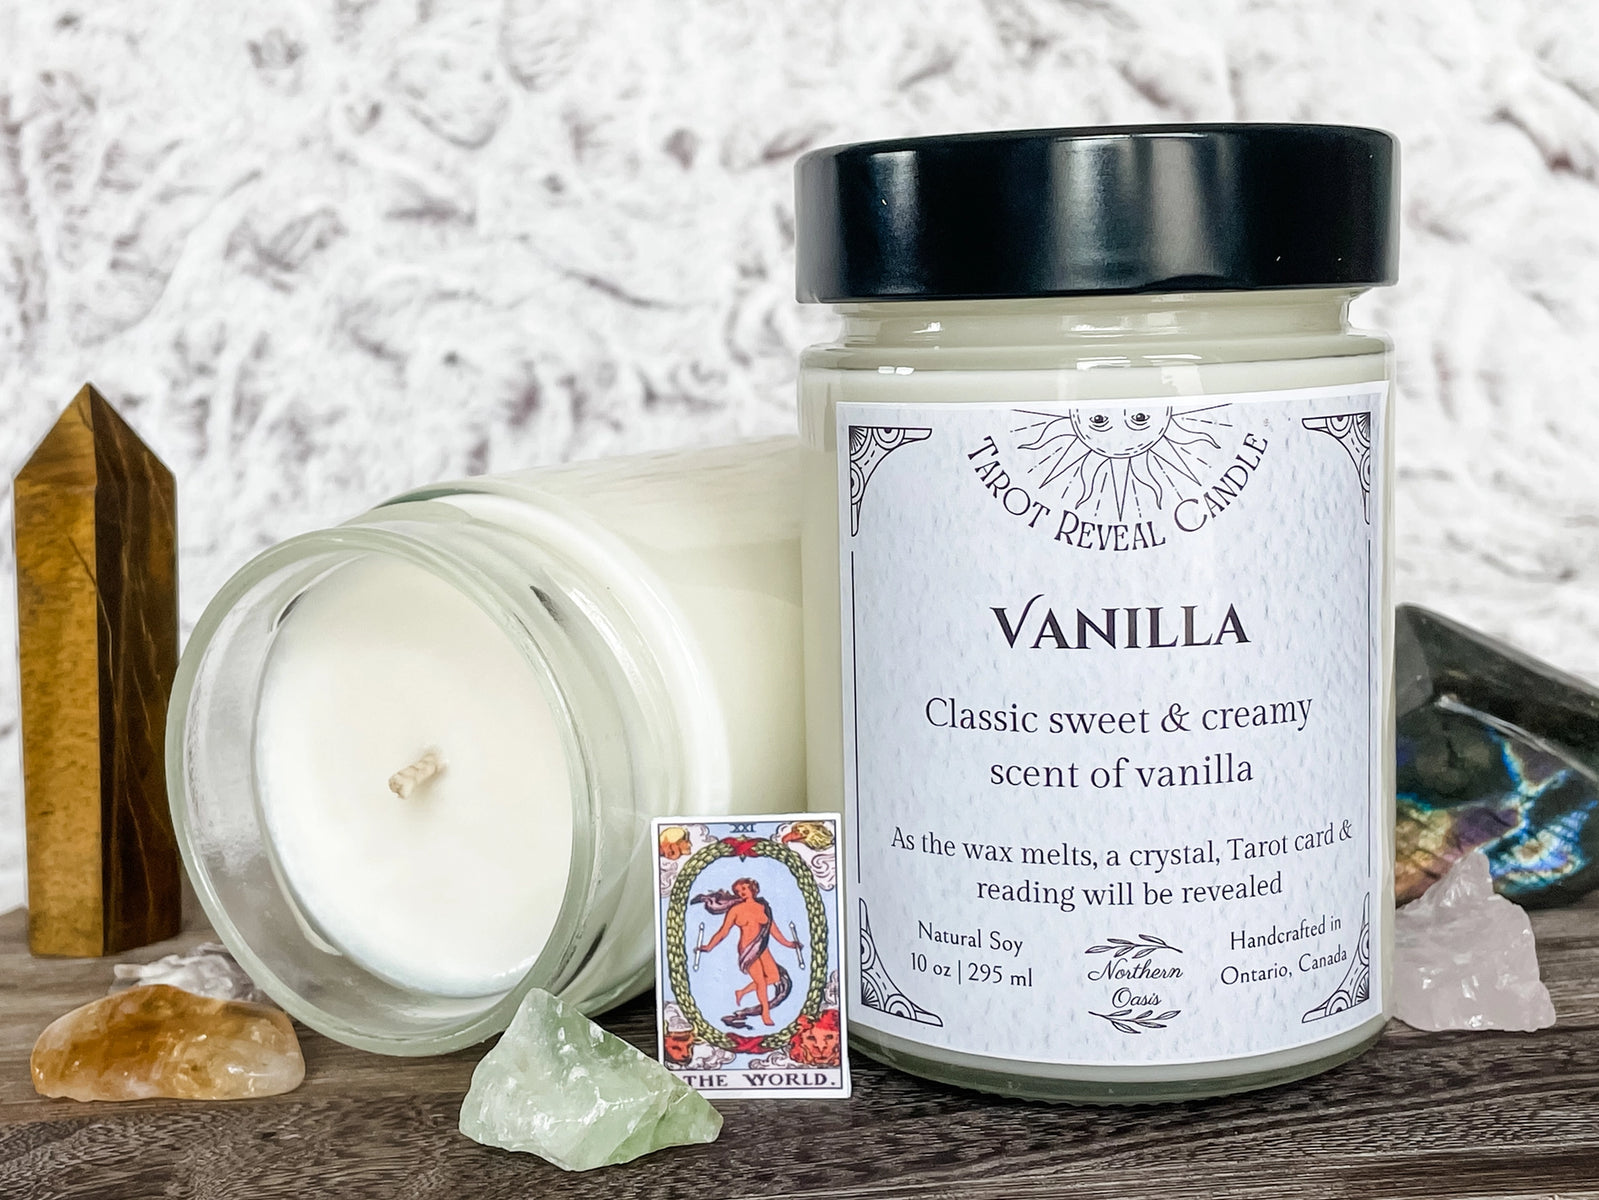 Northern Oasis Tarot and Crystal Reveal Candle